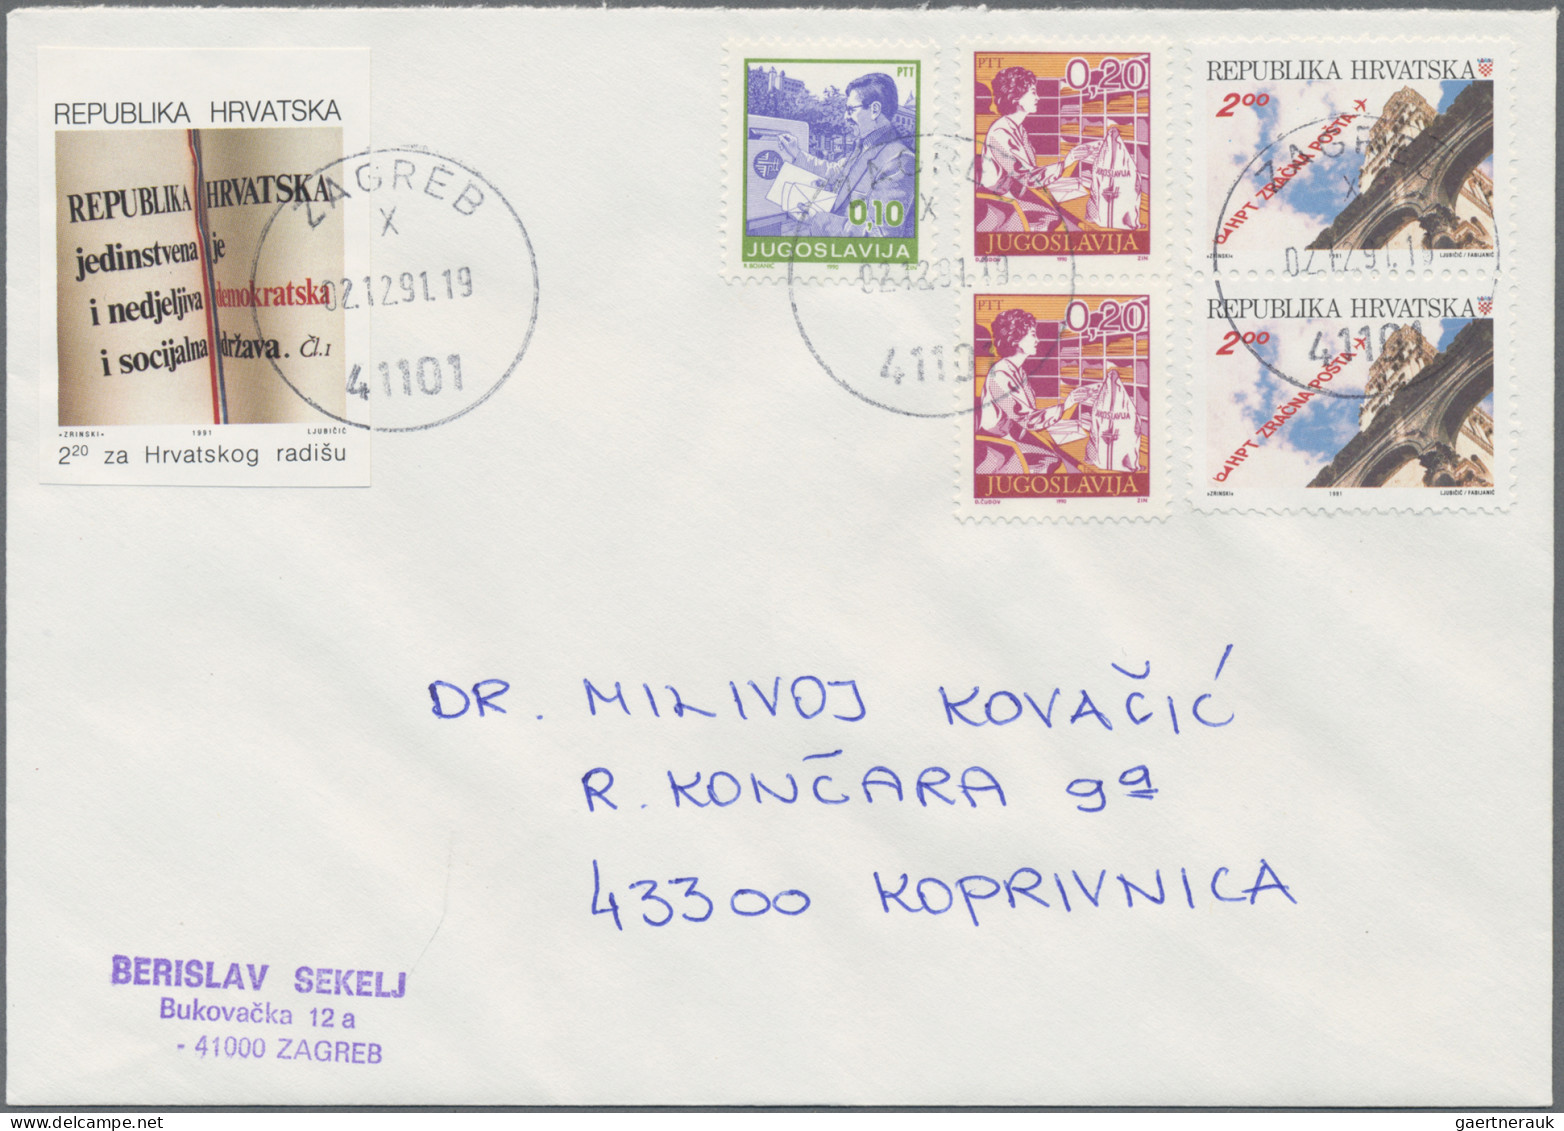 Croatia: 1991/1992: Collection Of More Than 100 Covers, Postcards, FDC's Etc., M - Croatia